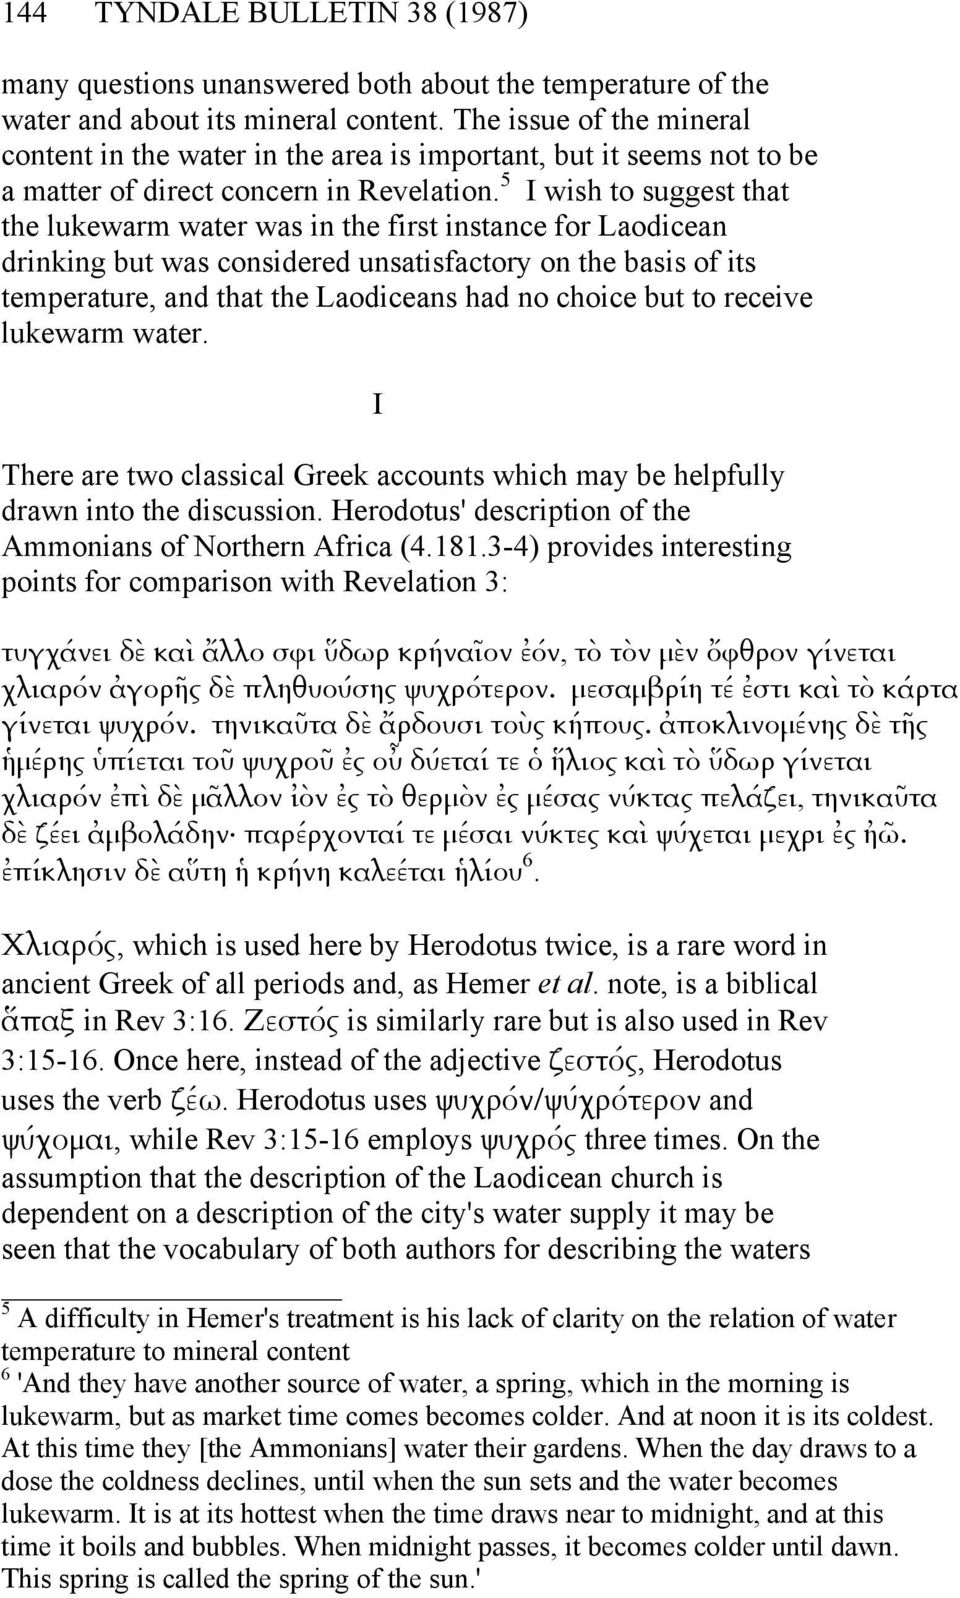 5 I wish to suggest that the lukewarm water was in the first instance for Laodicean drinking but was considered unsatisfactory on the basis of its temperature, and that the Laodiceans had no choice